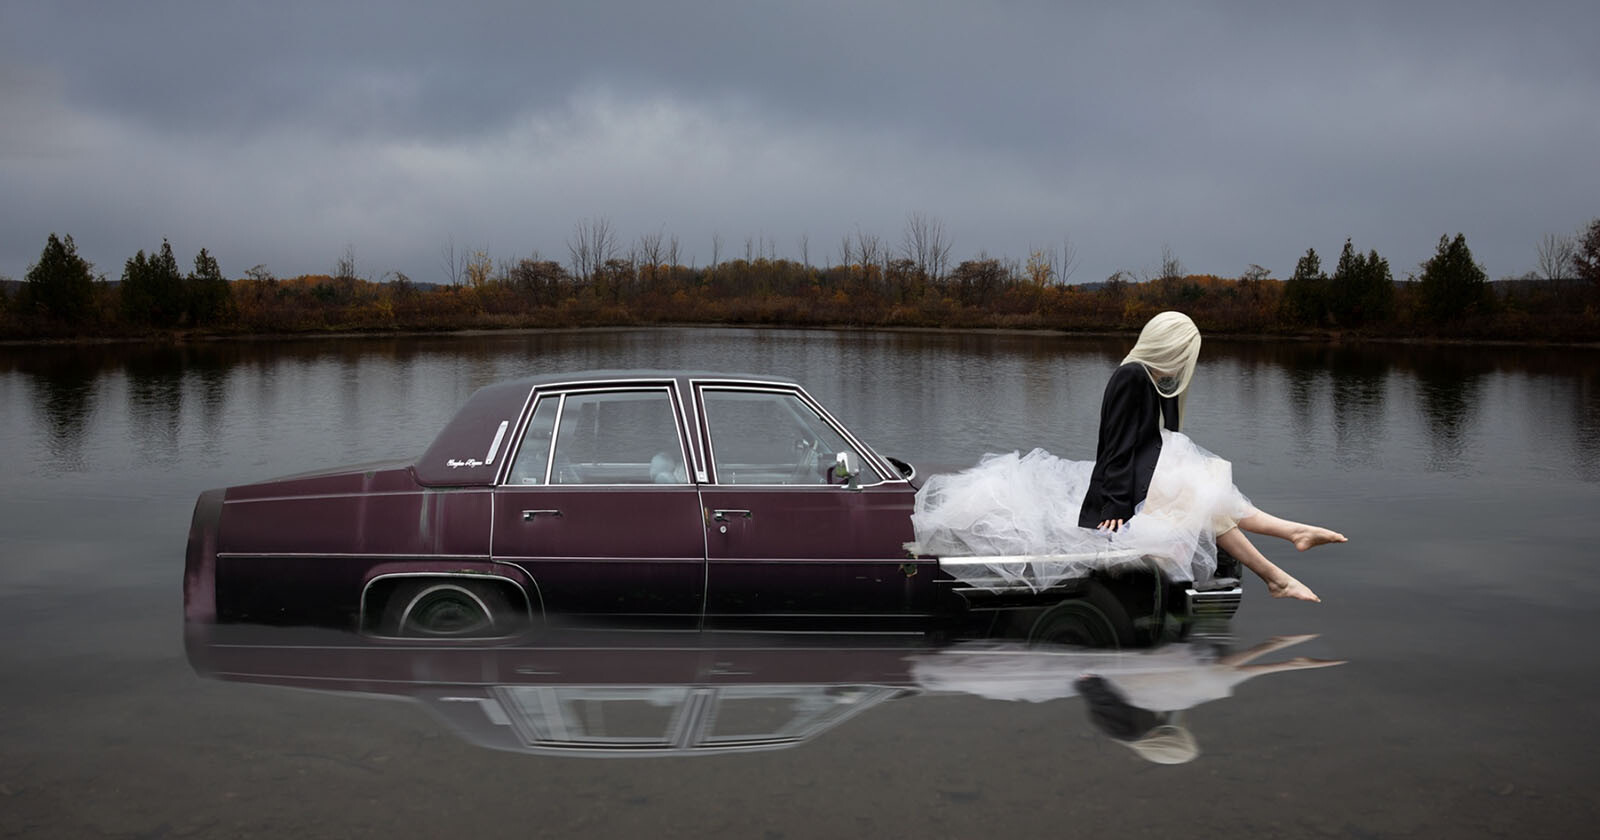 The Salvage Mission Photo Series Gives Old Cars New Life